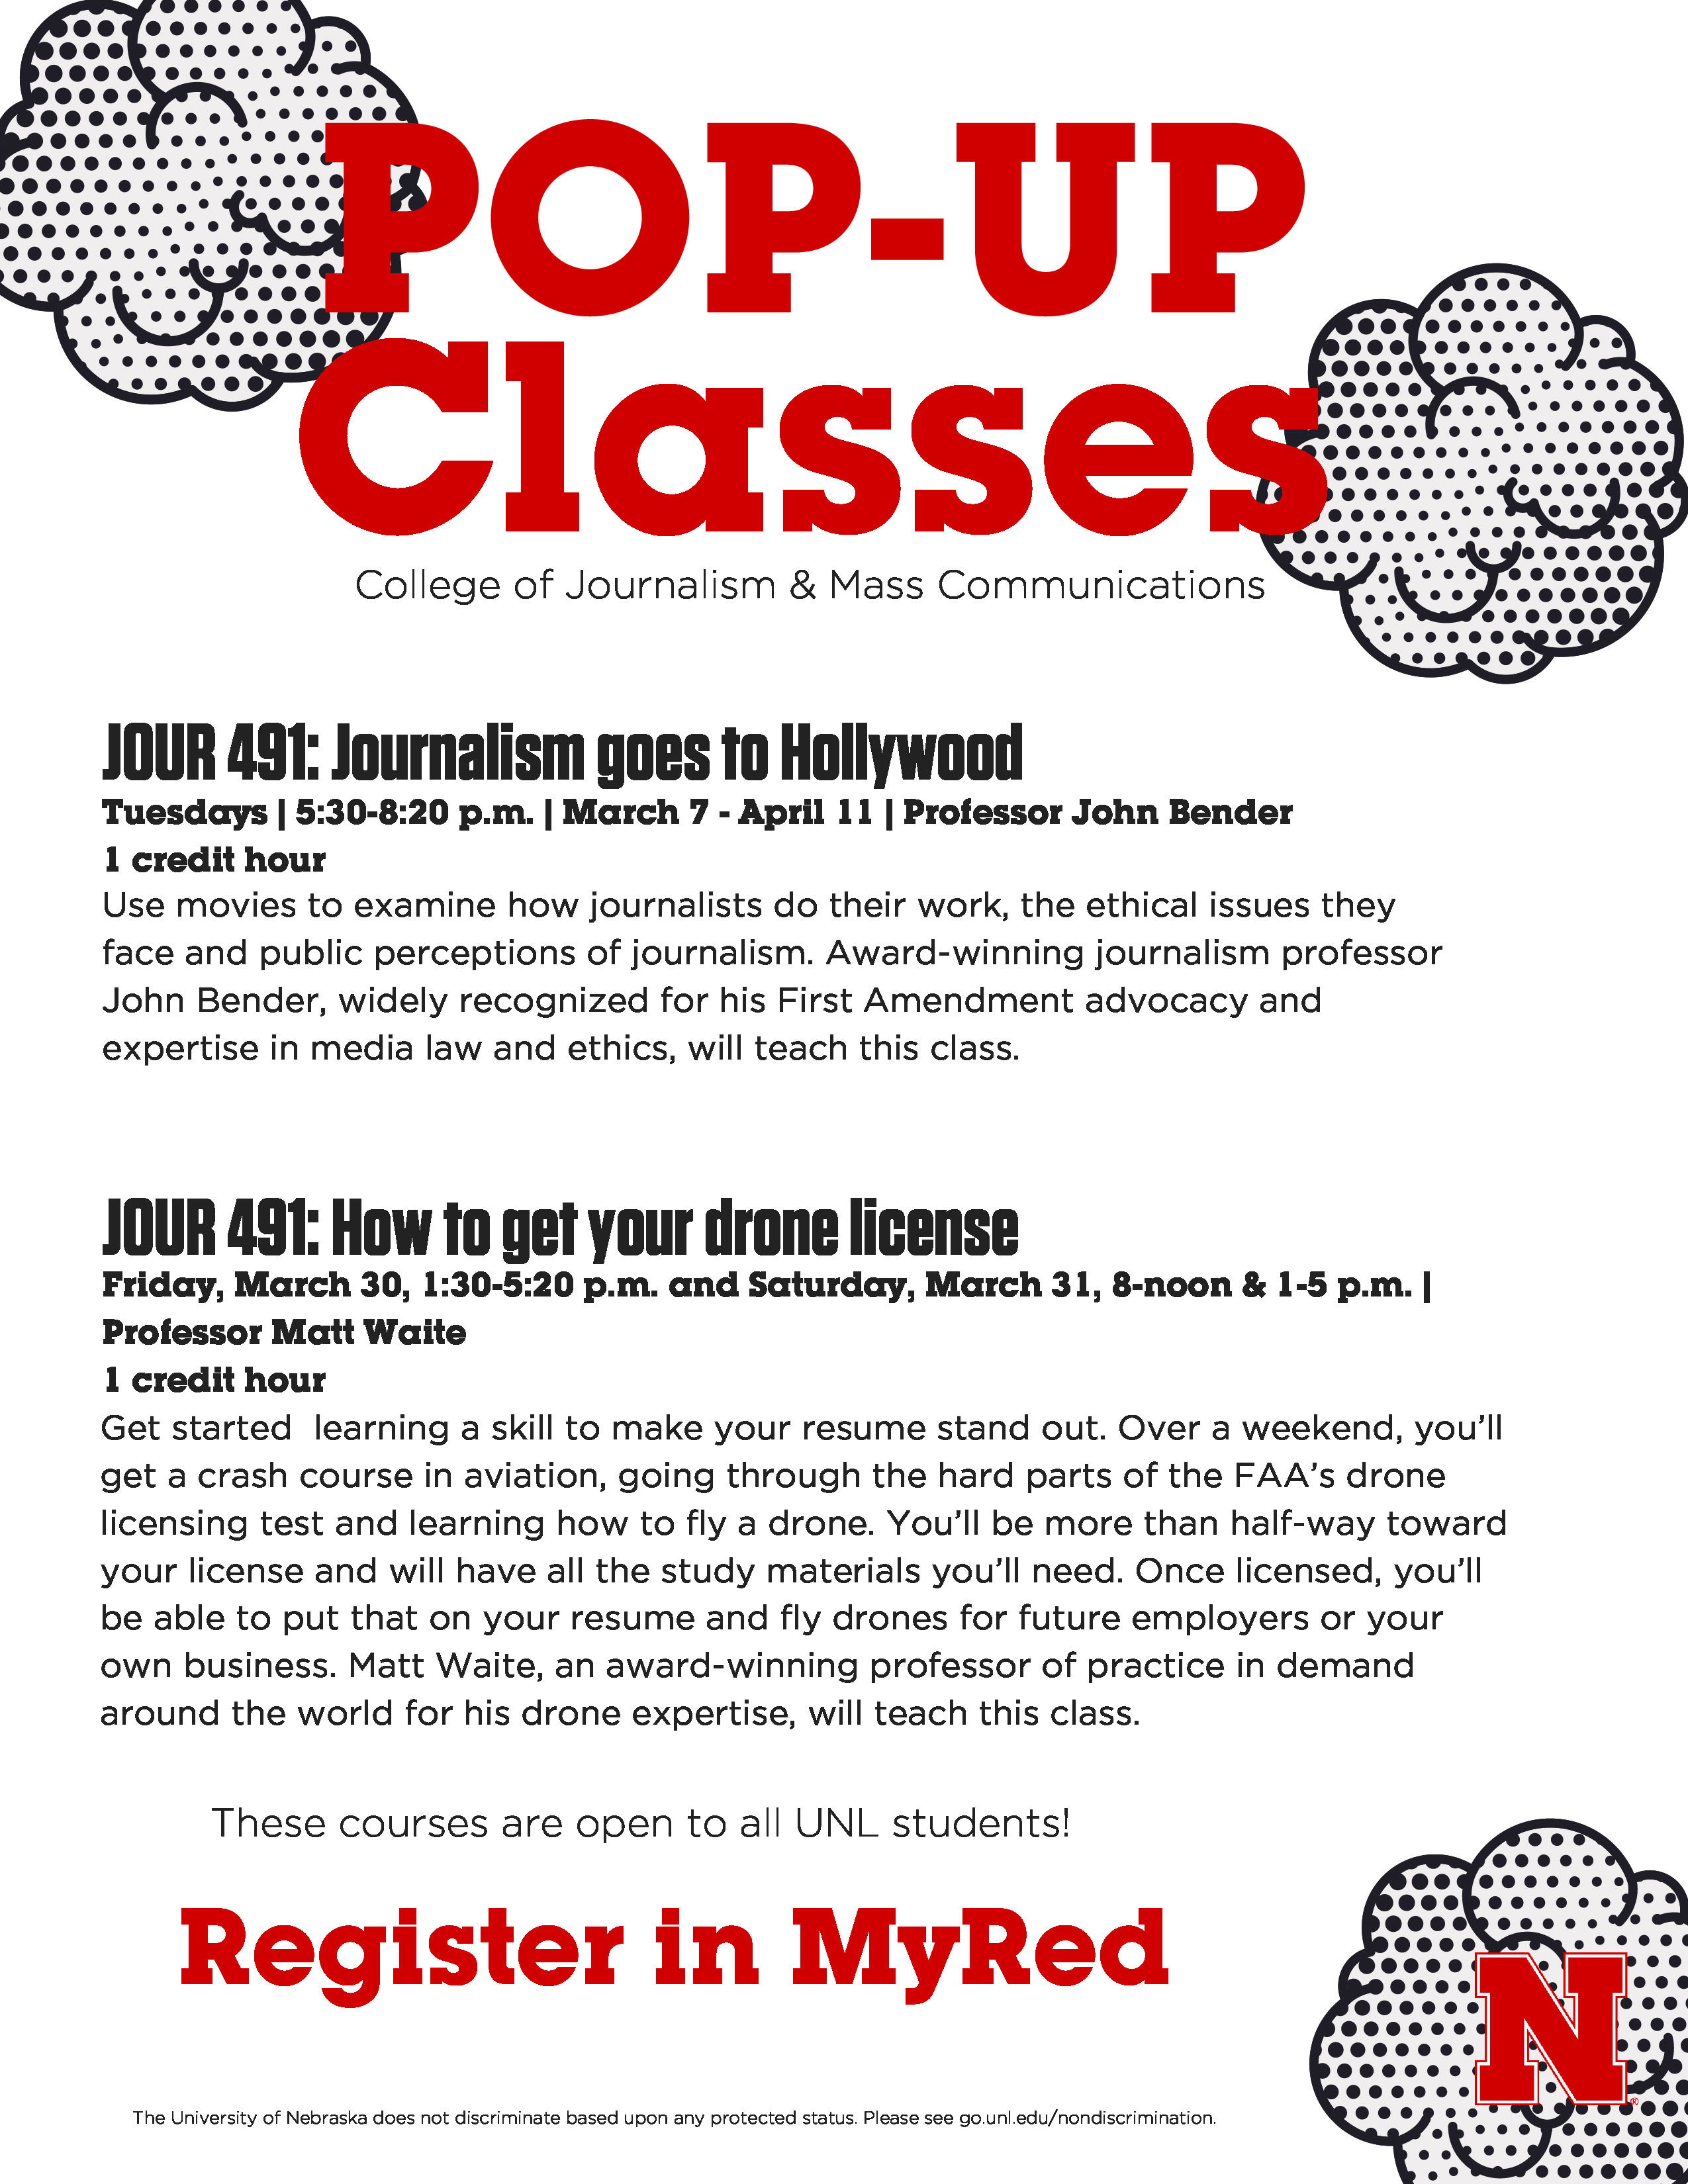 These fun, one-credit hour courses can be found in MyRed and are available to all UNL students.